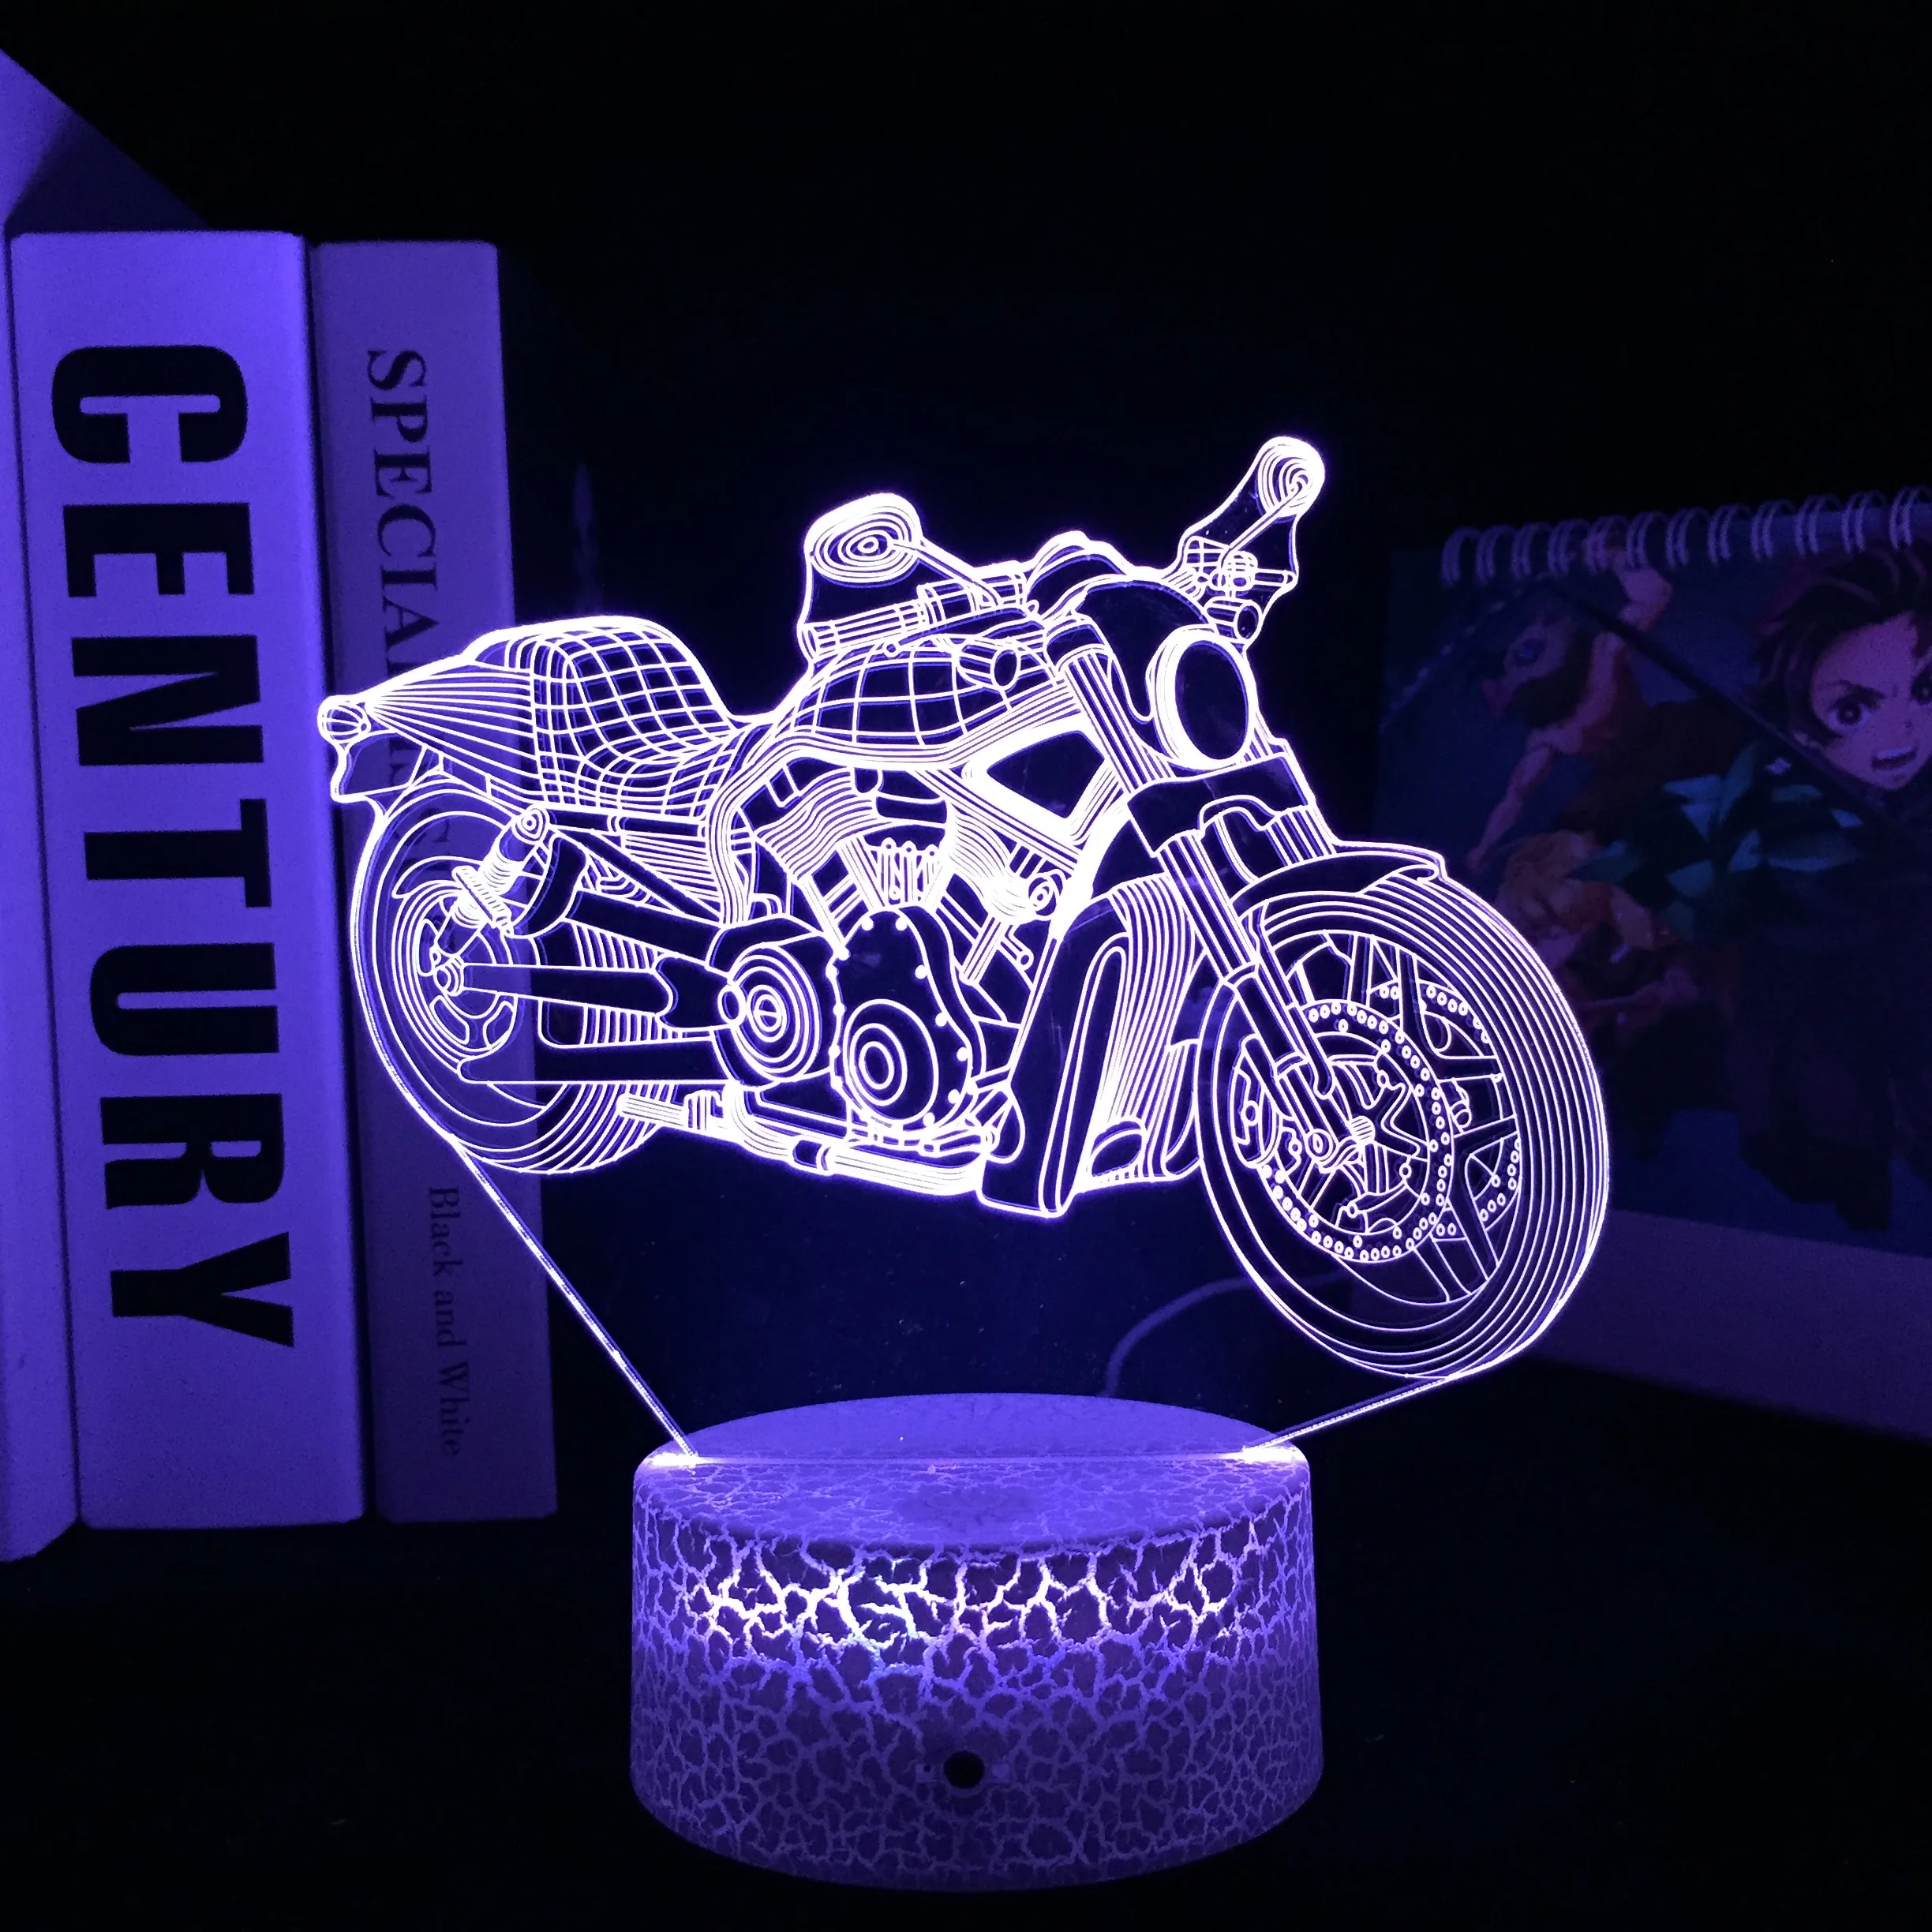 

3D Illusion Lamp Motocycle Nightlight for Child Bedroom Decor Color Changing Atmosphere LED Night Light Birthday Gift Dropship